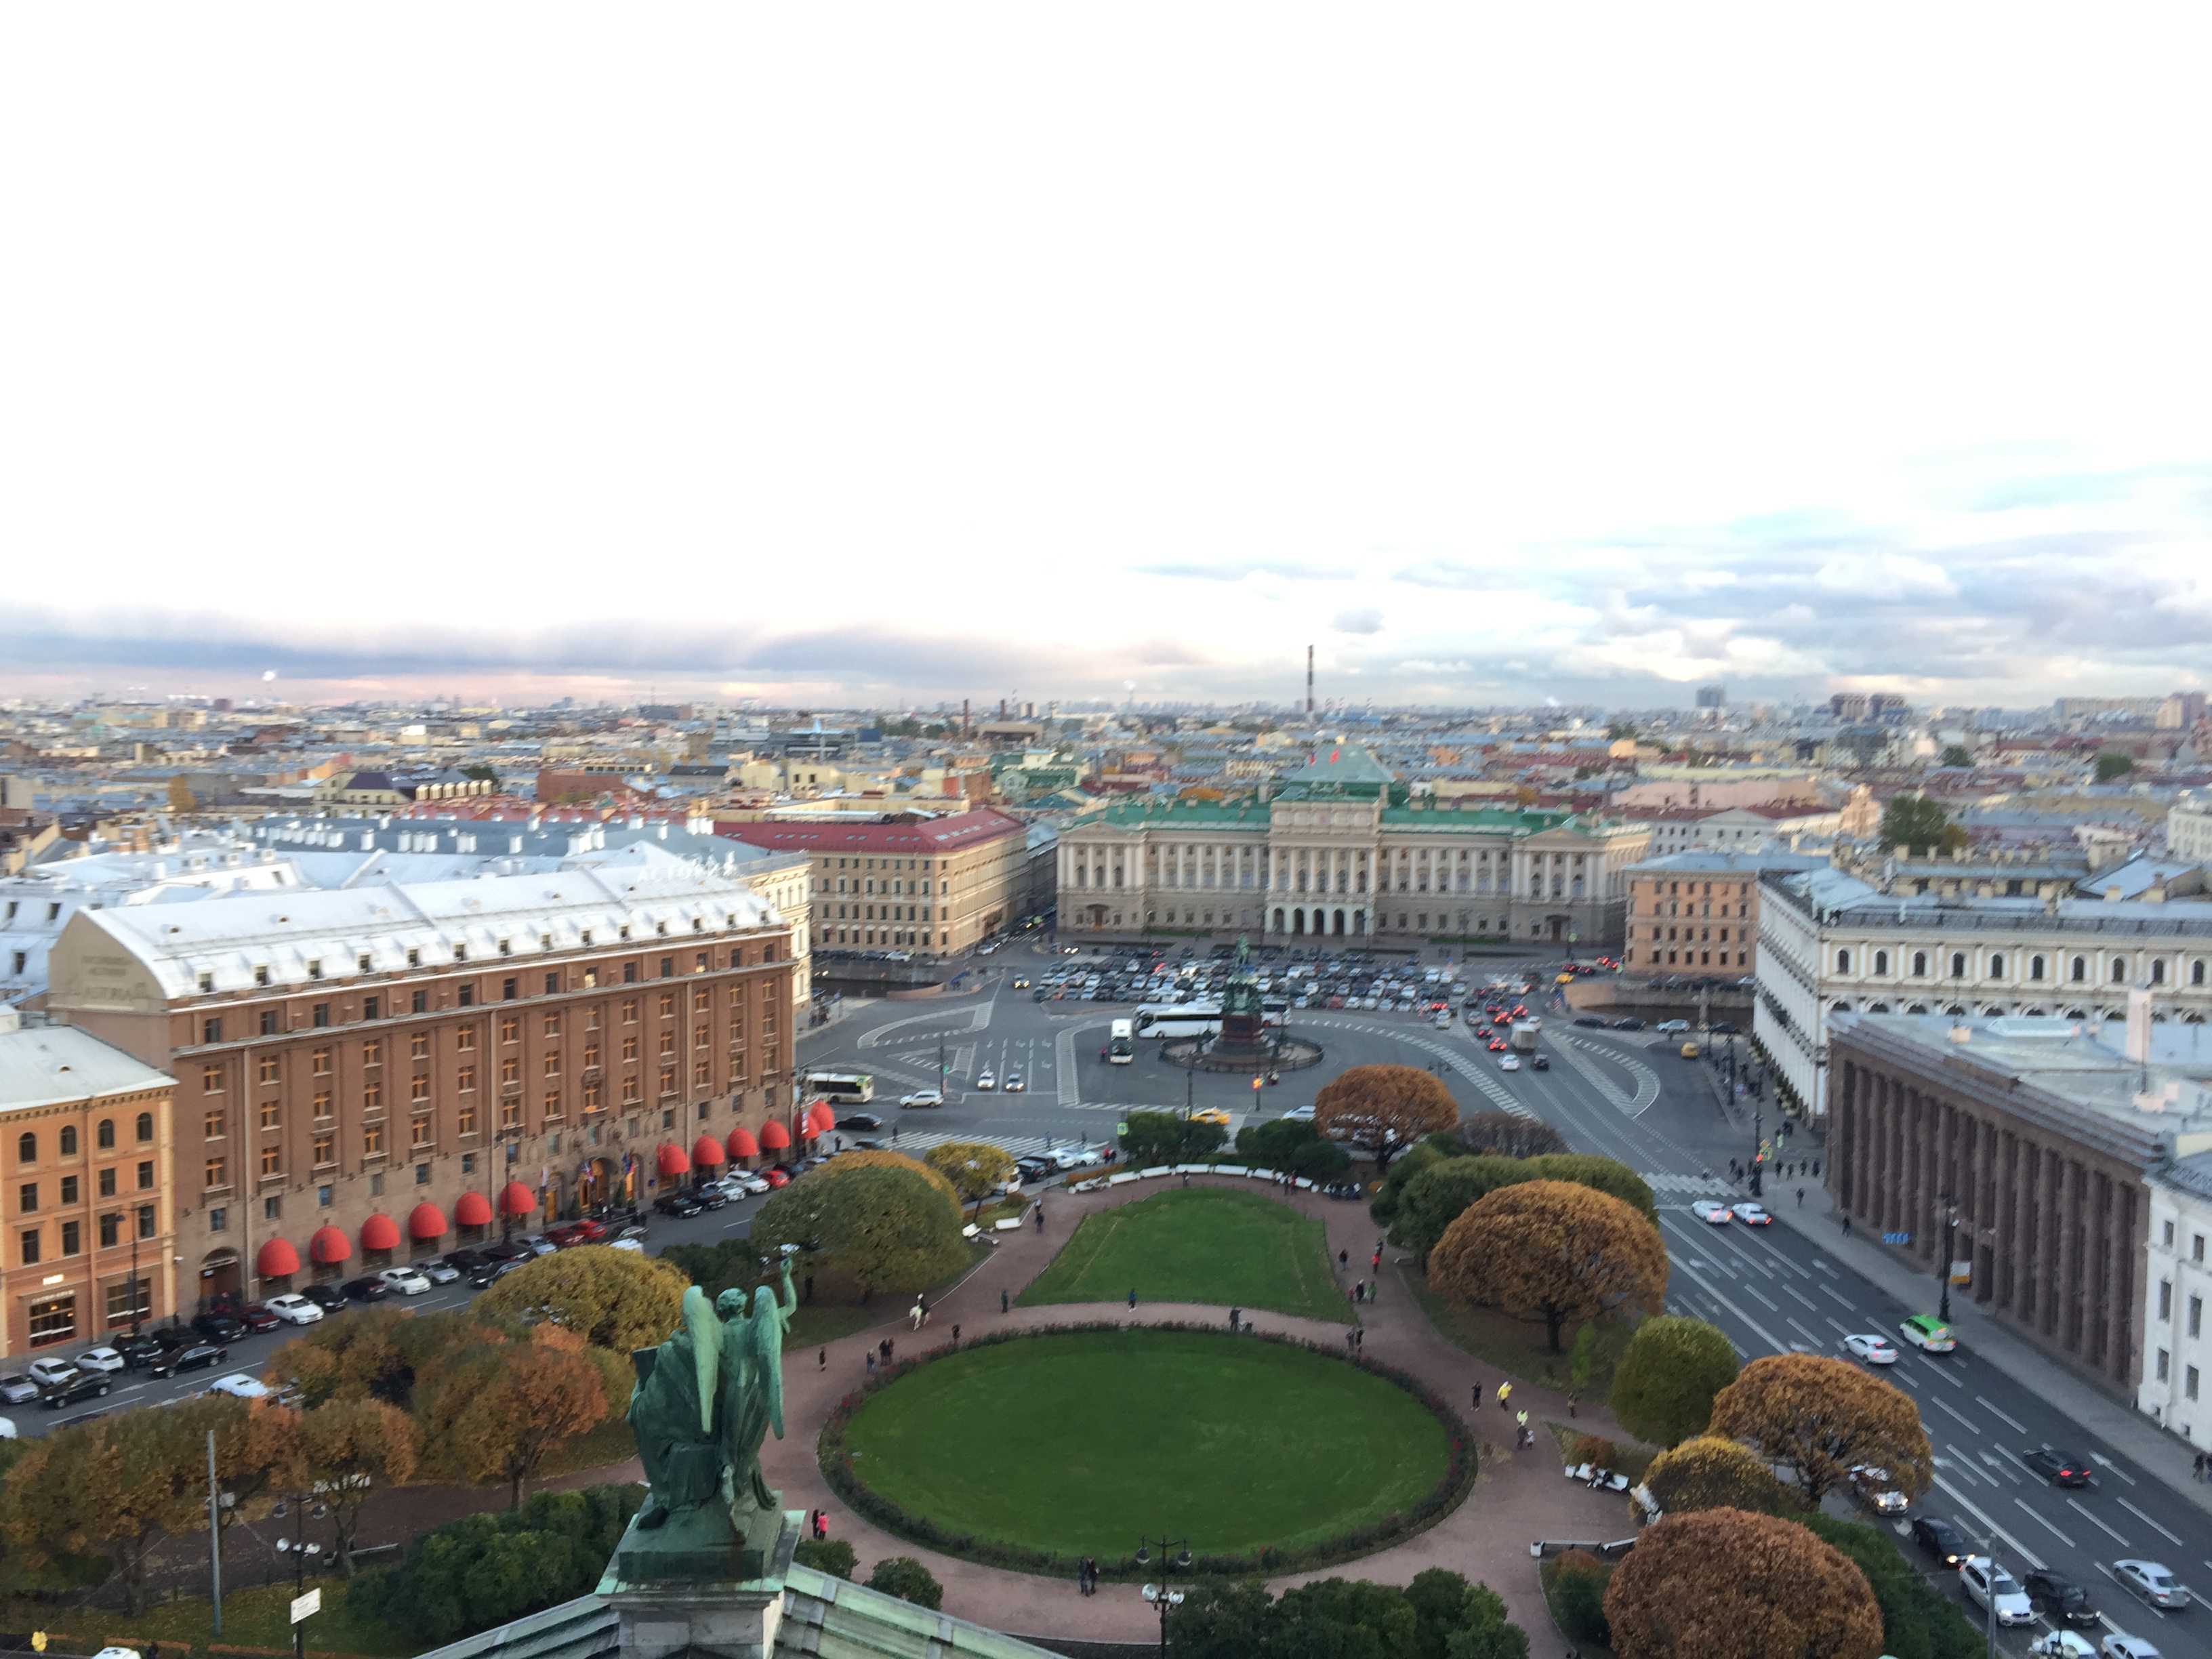 View of St. Petersburg from the top of St. Isaac's Cathedral